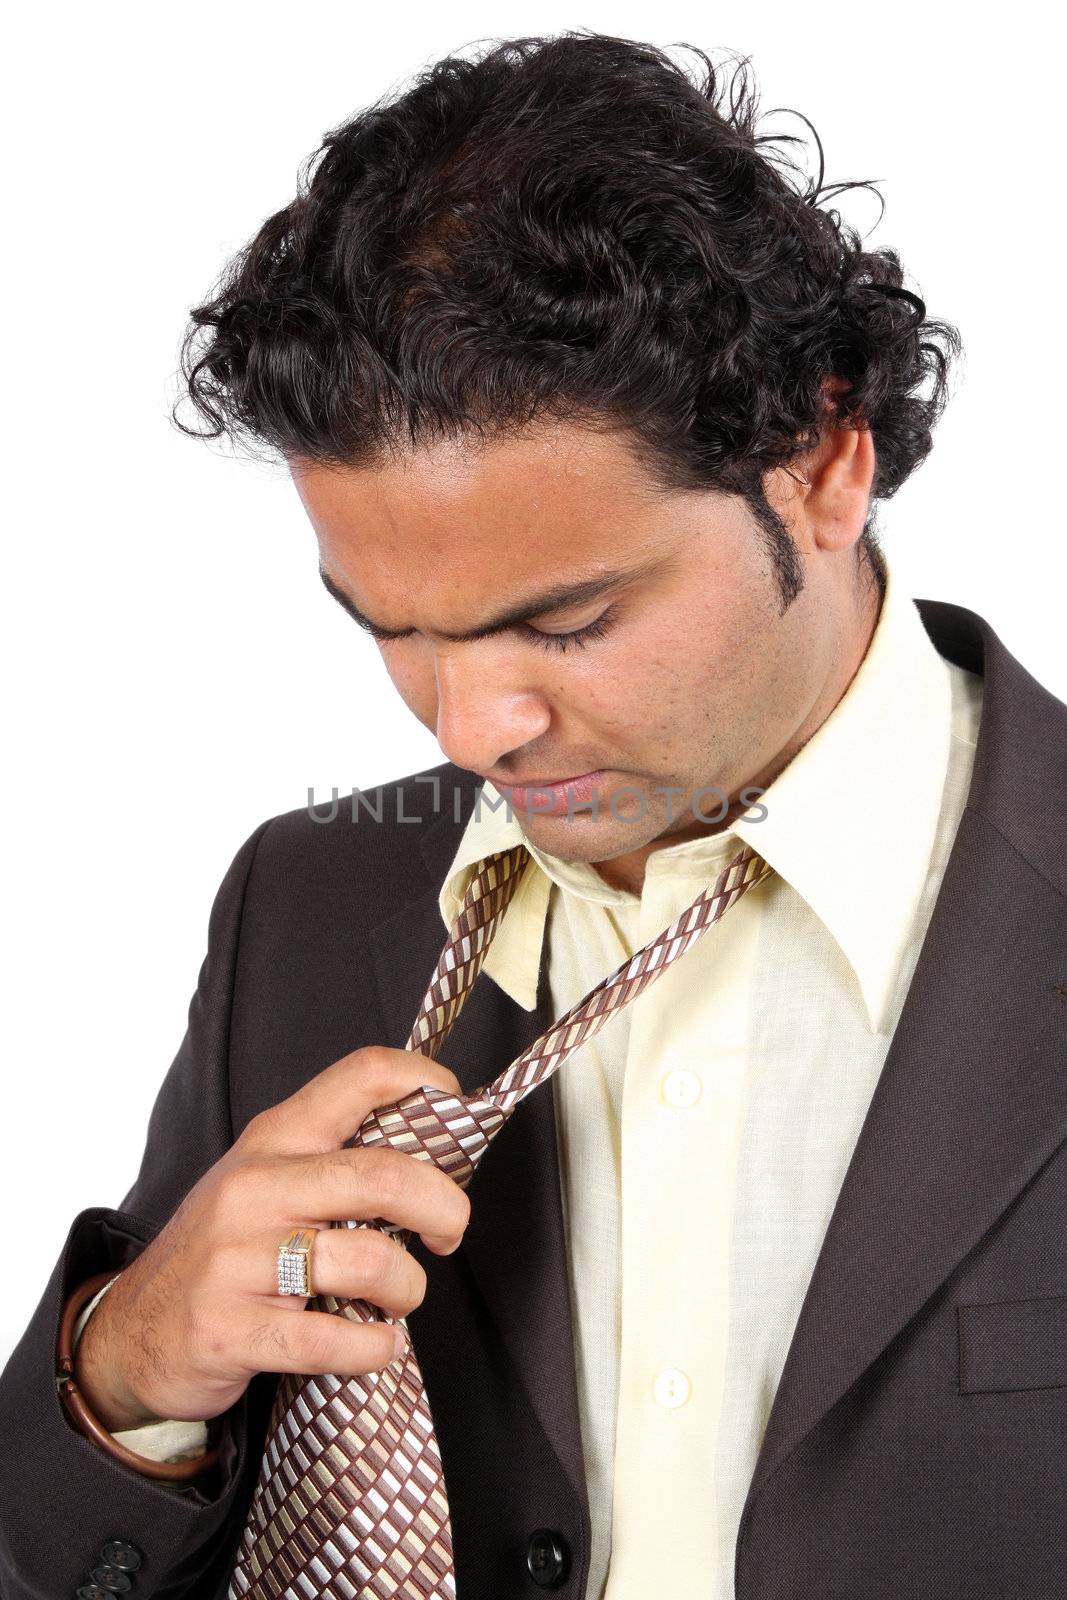 A tied Indian businessman removing his tie, on white studio background.